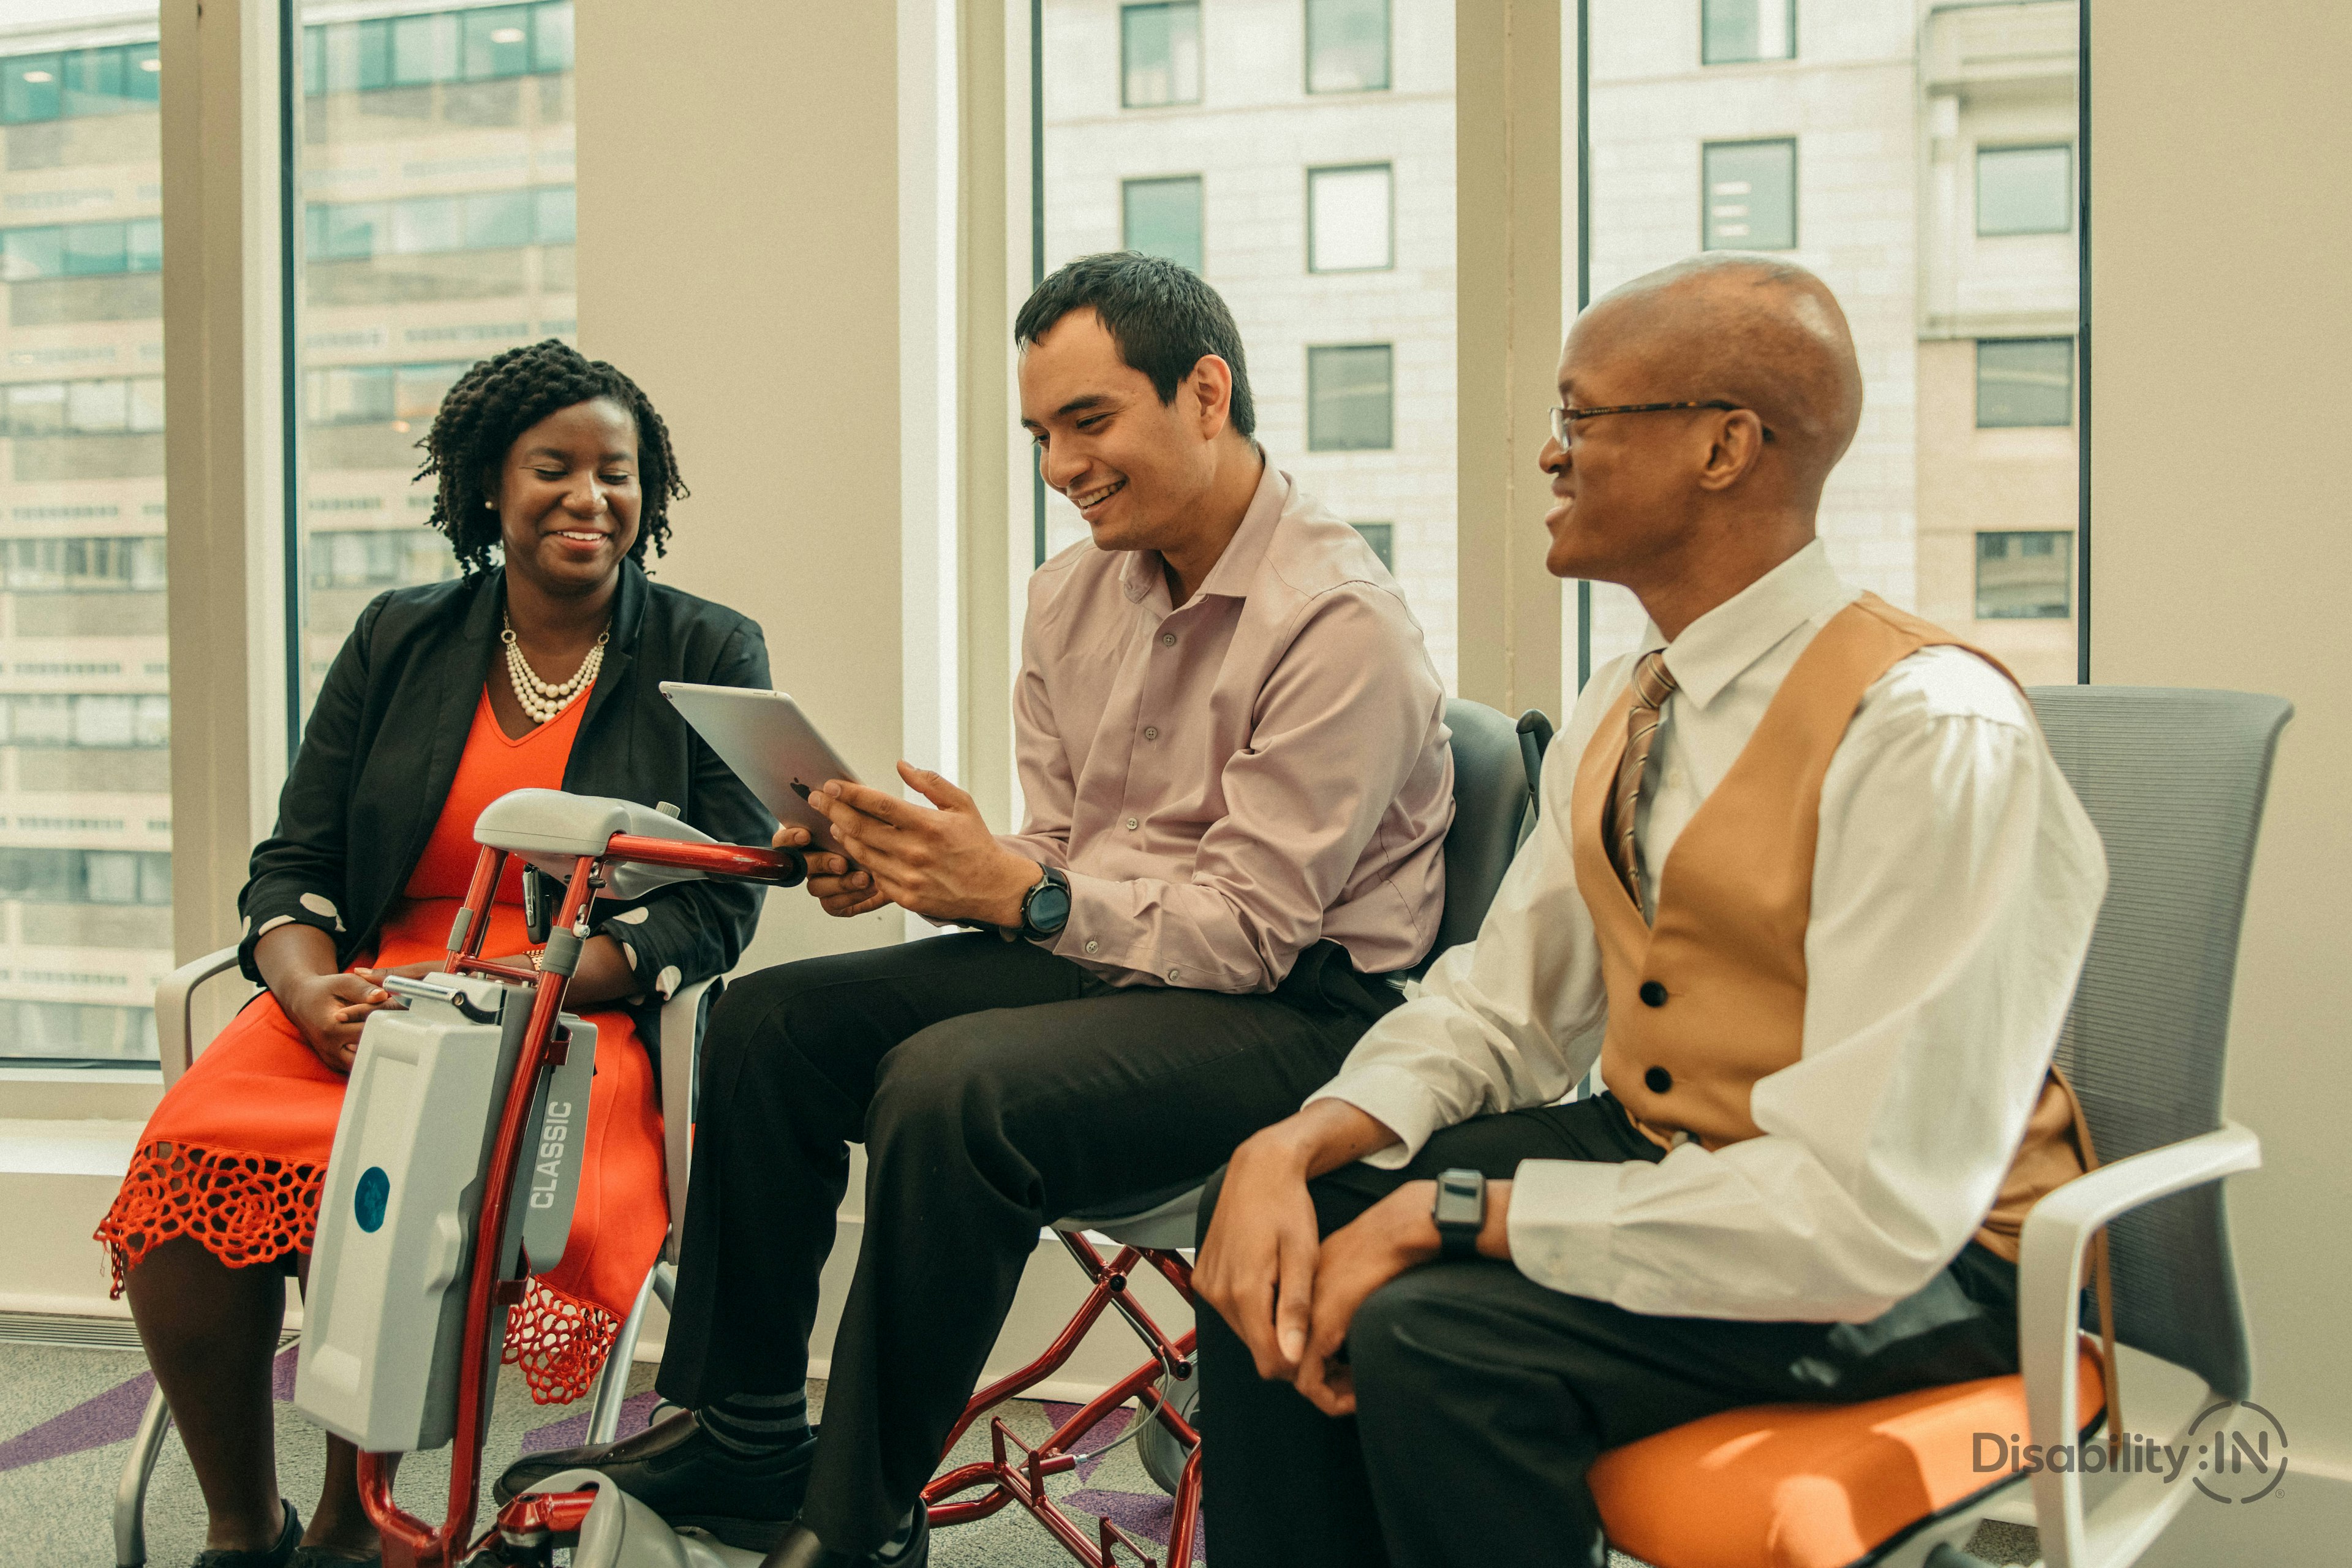 three disabled people with various accommodations working together